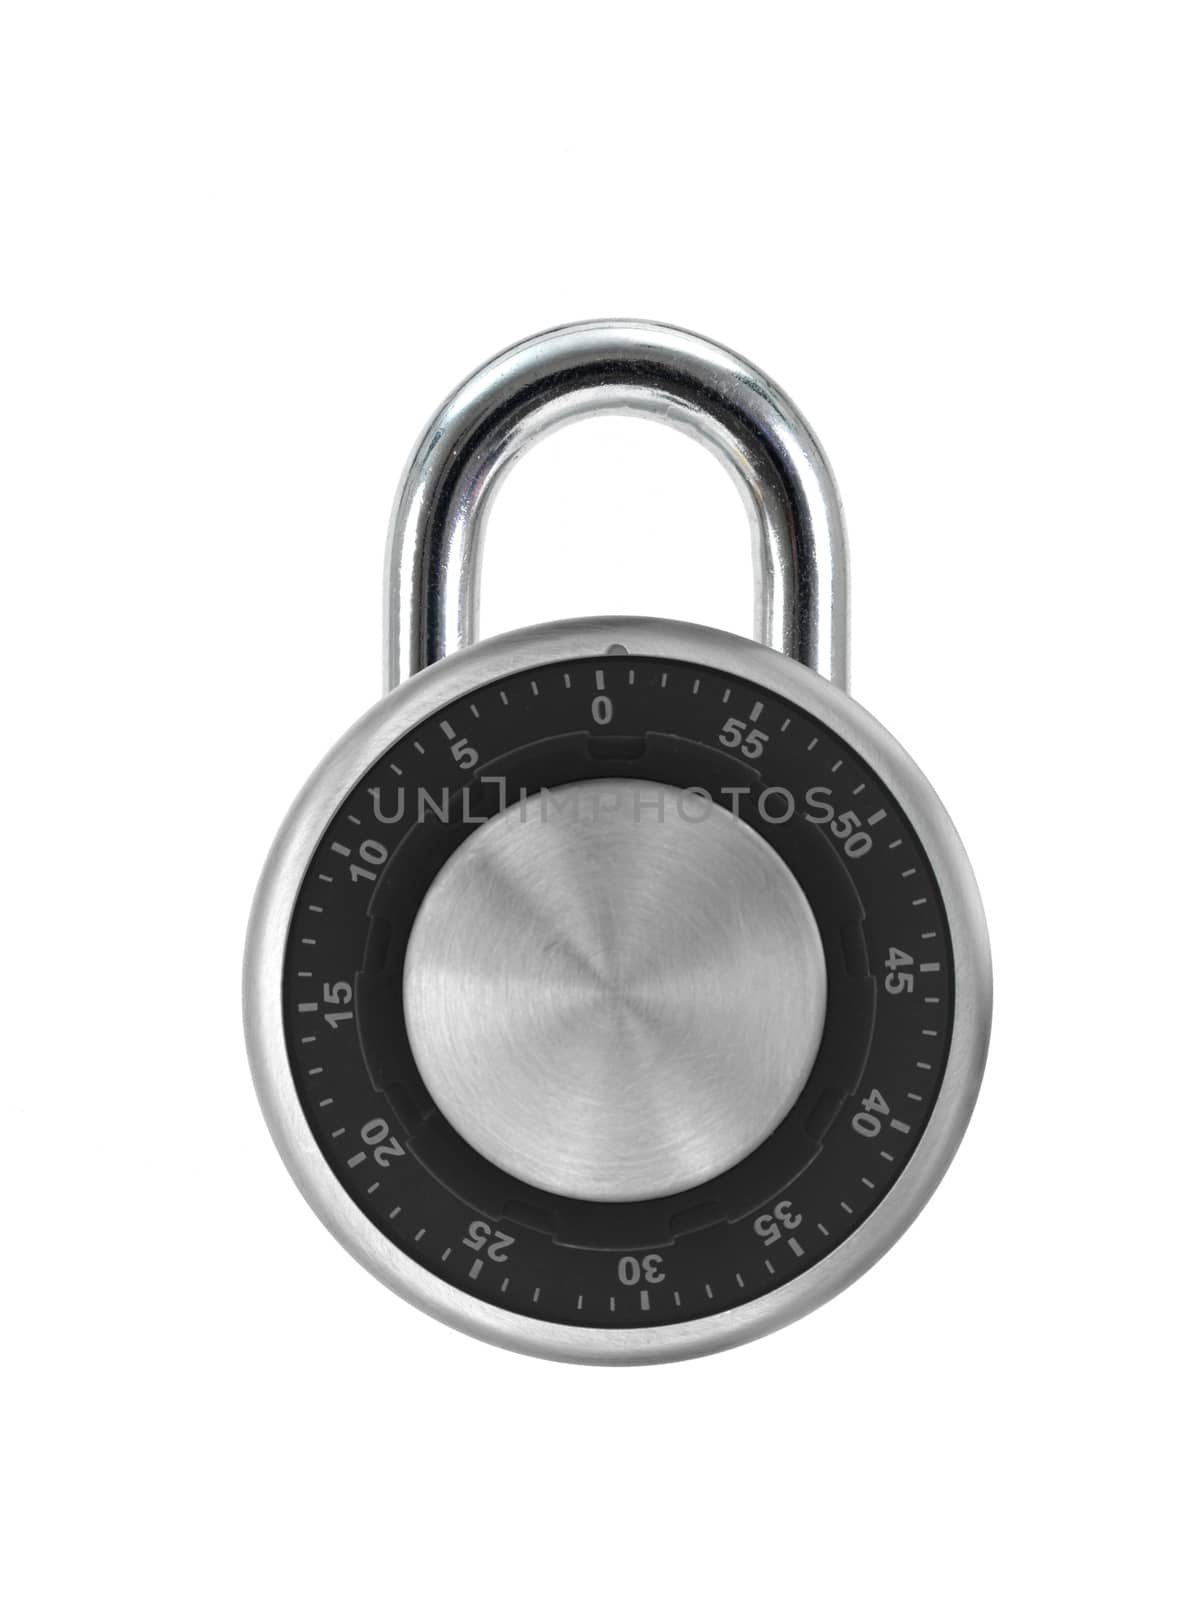 A Combination padlock isolated against a white background